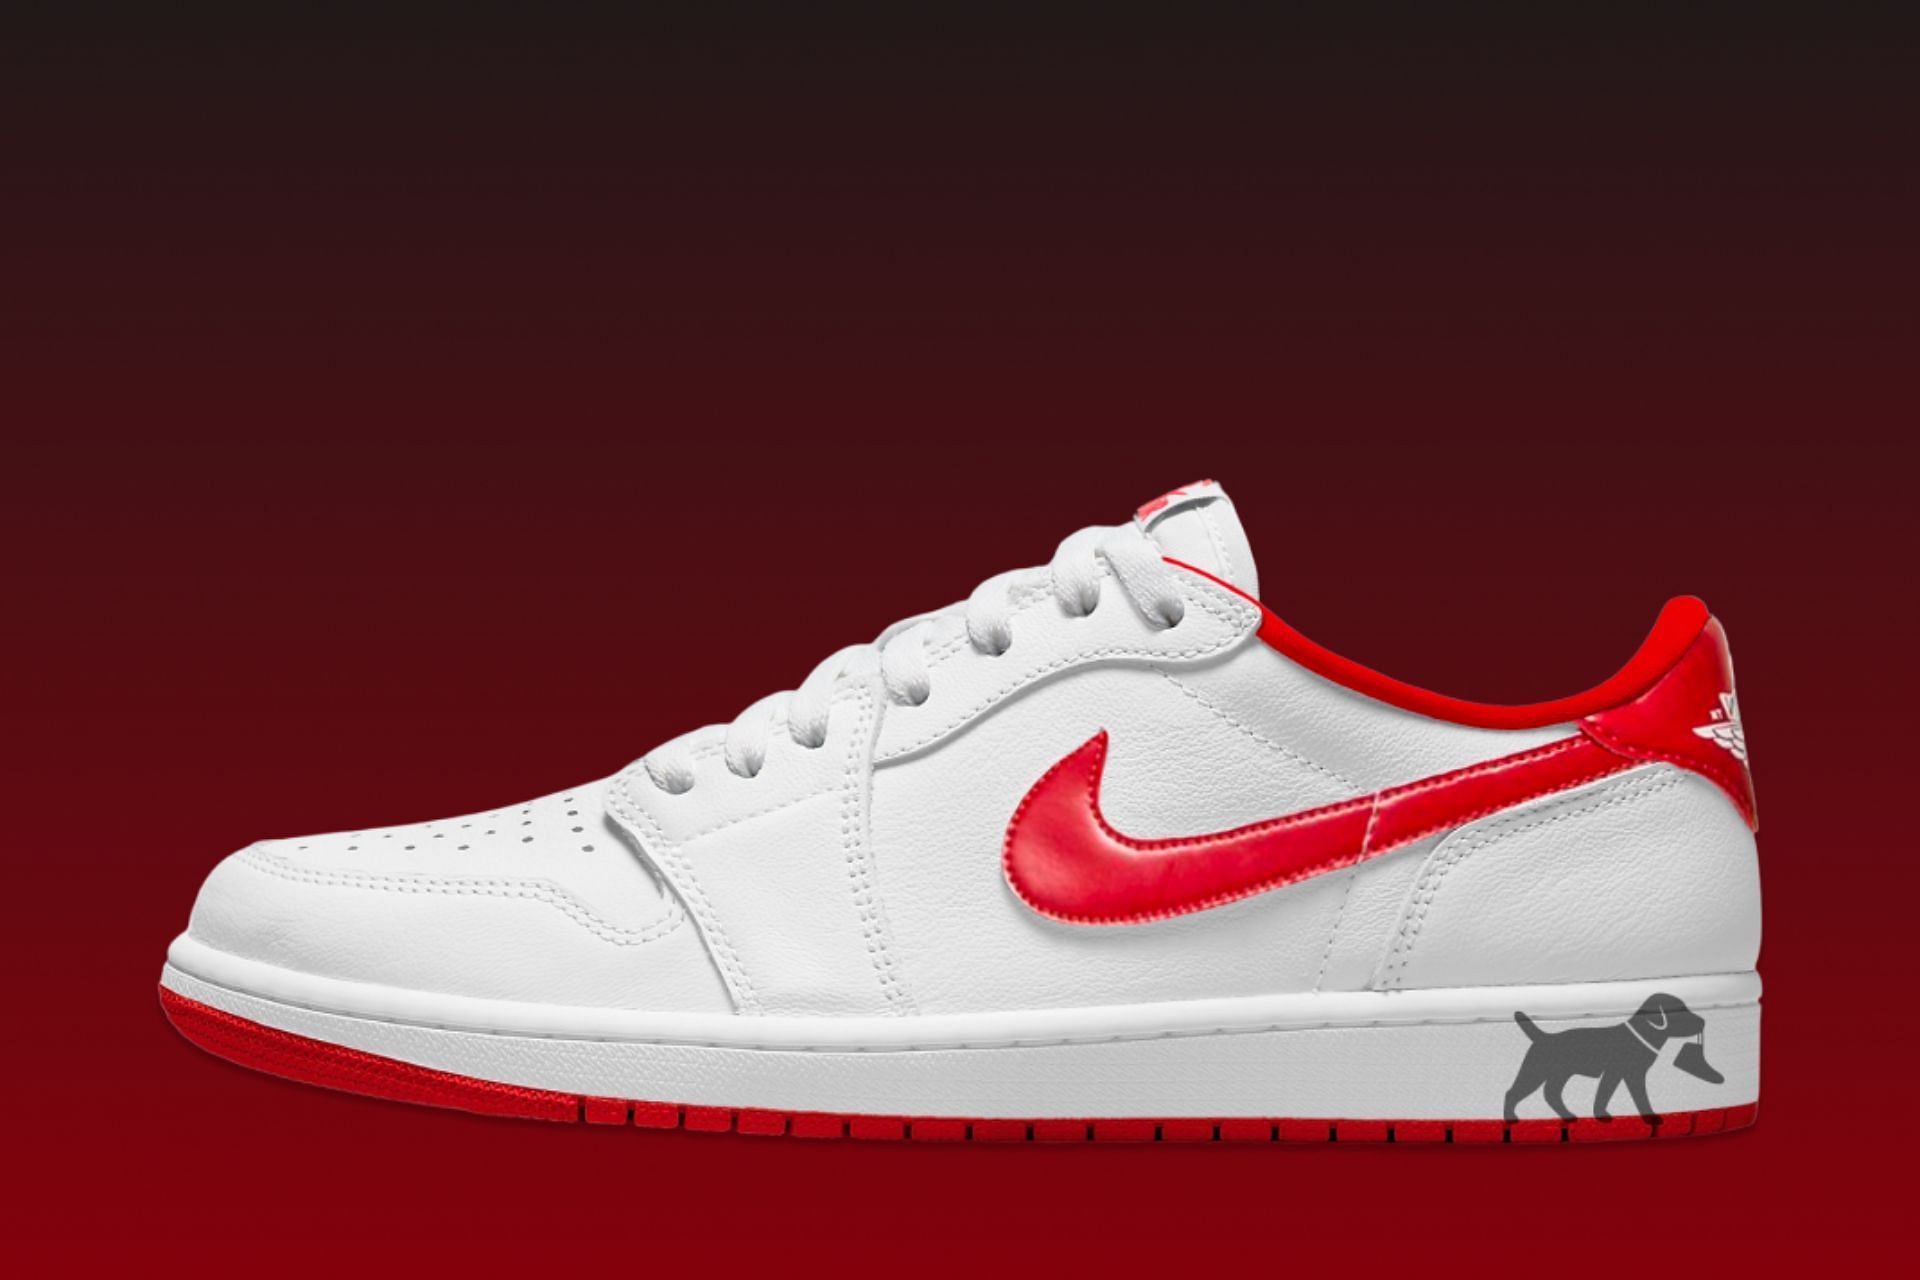 Take a closer look at the arriving Air Jordan 1 Low Metallic Red shoes (Image via Sole Retriever)